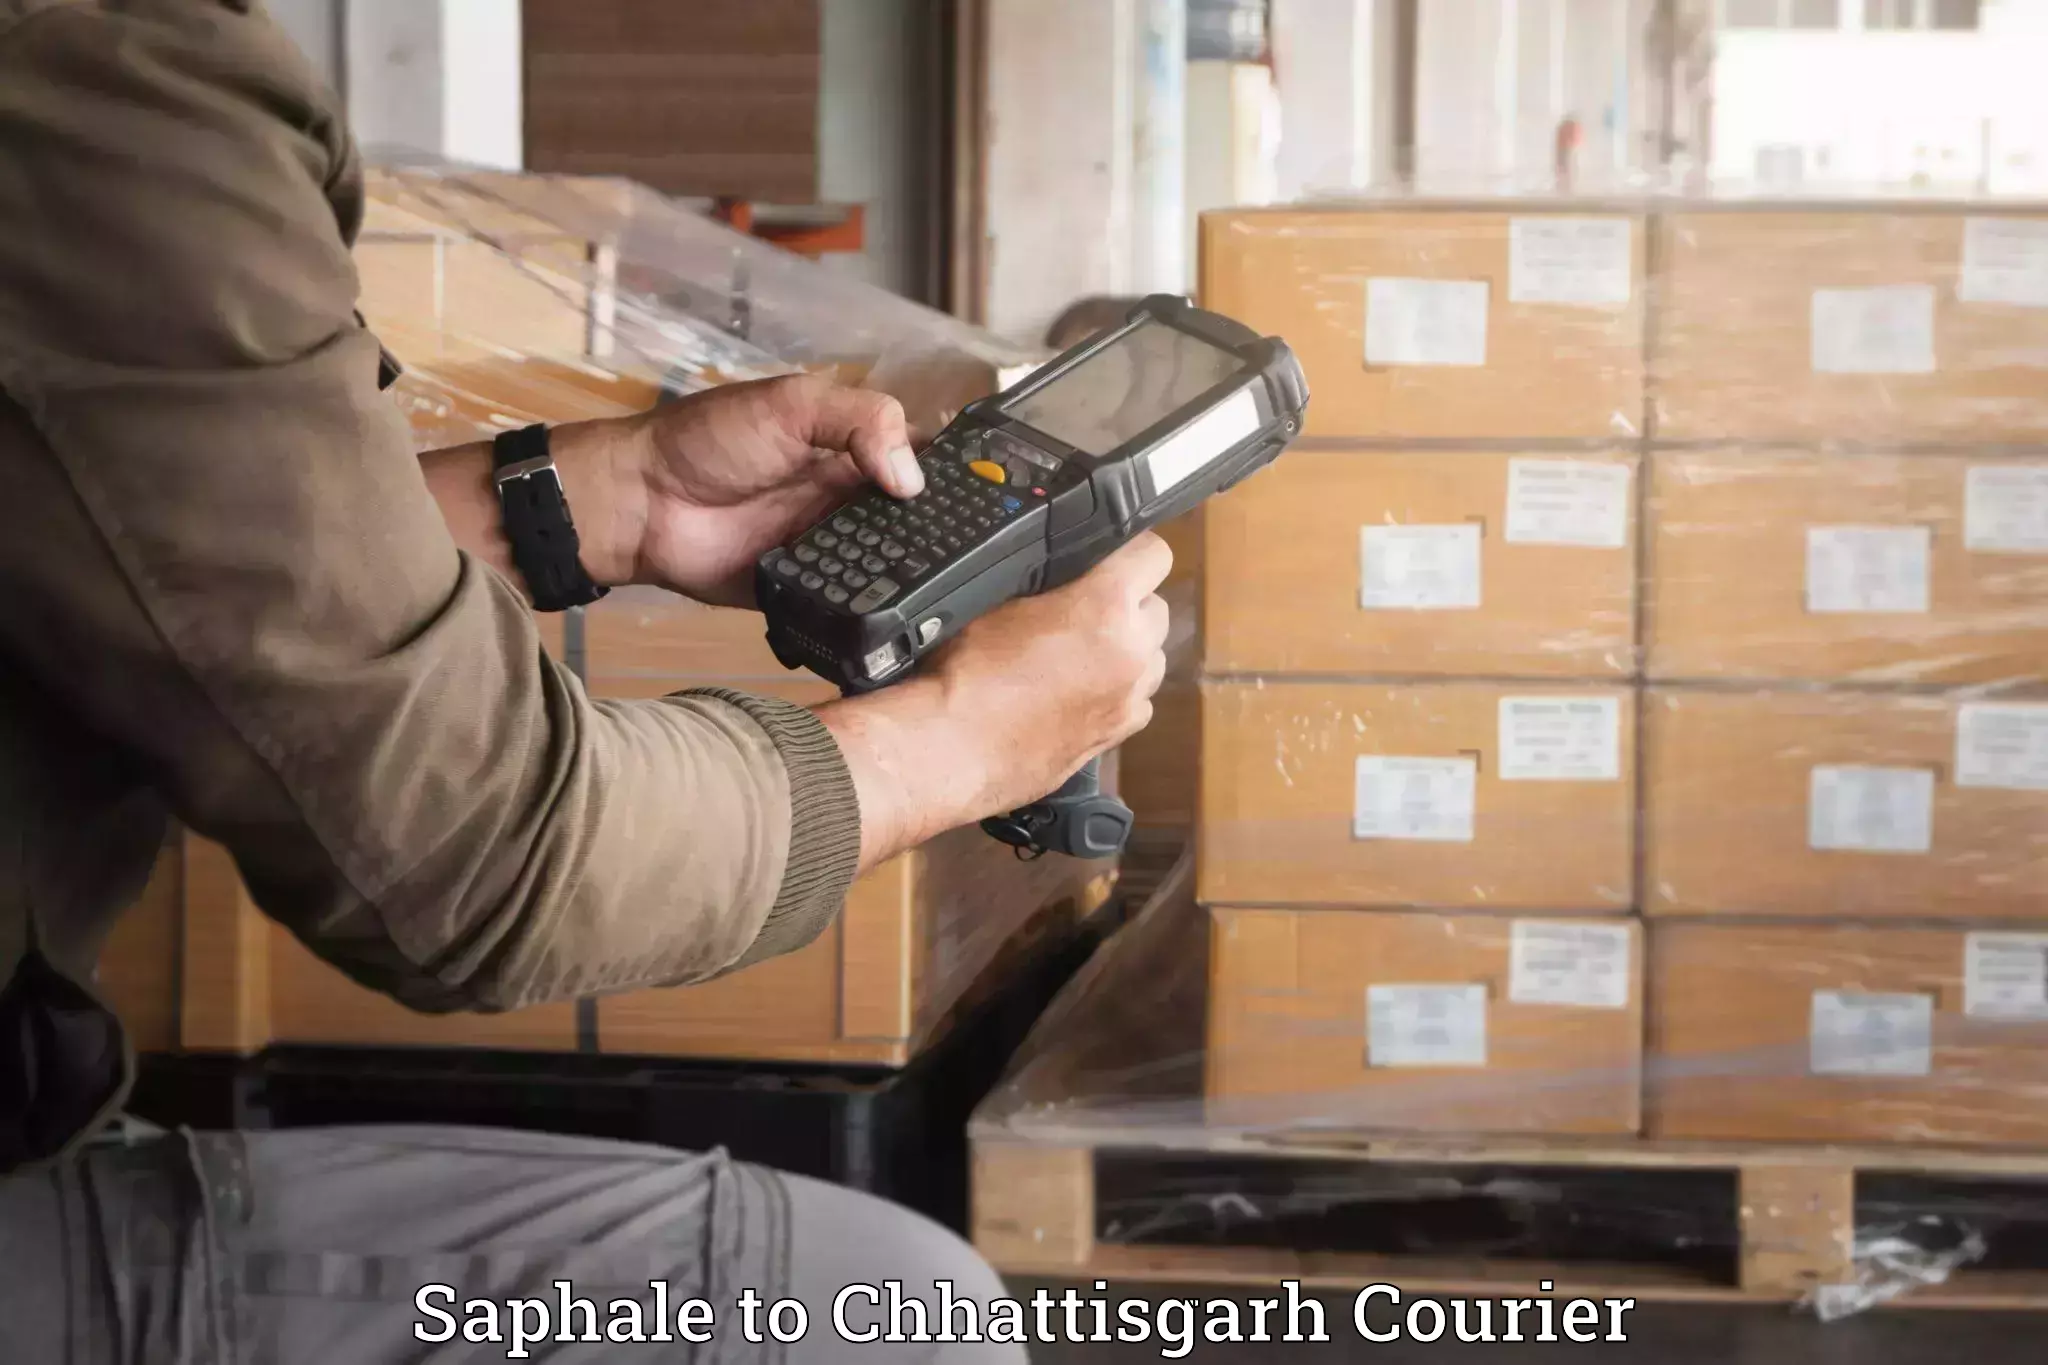 Luggage delivery system Saphale to Chhattisgarh